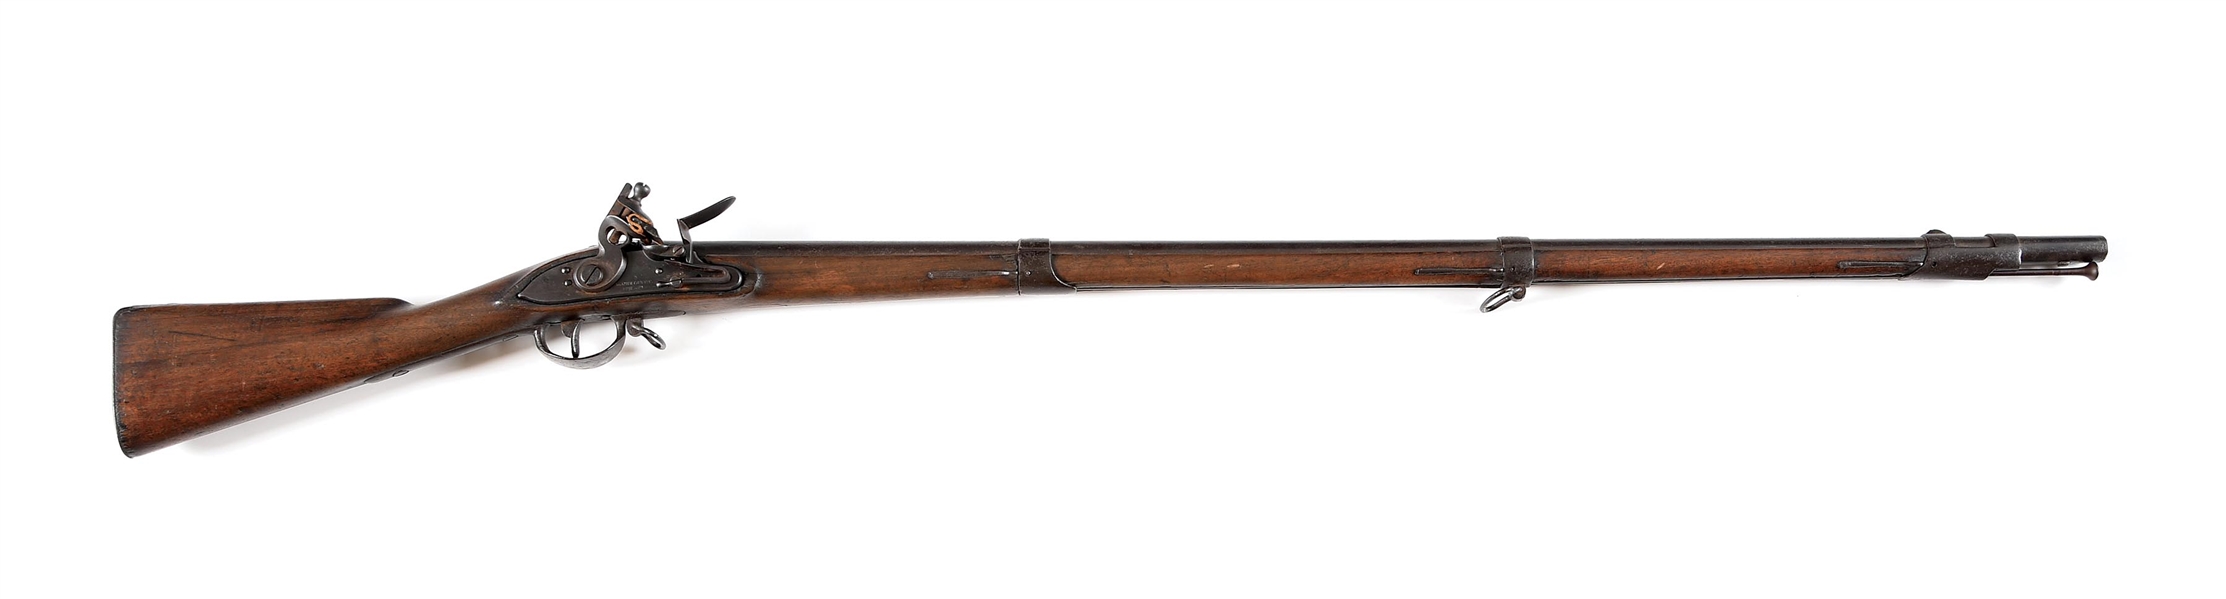 (A) MARYLAND STATE PROCURED US M1808 STYLE FLINTLOCK MUSKET WITH GHRISKEY MARKED LOCK.